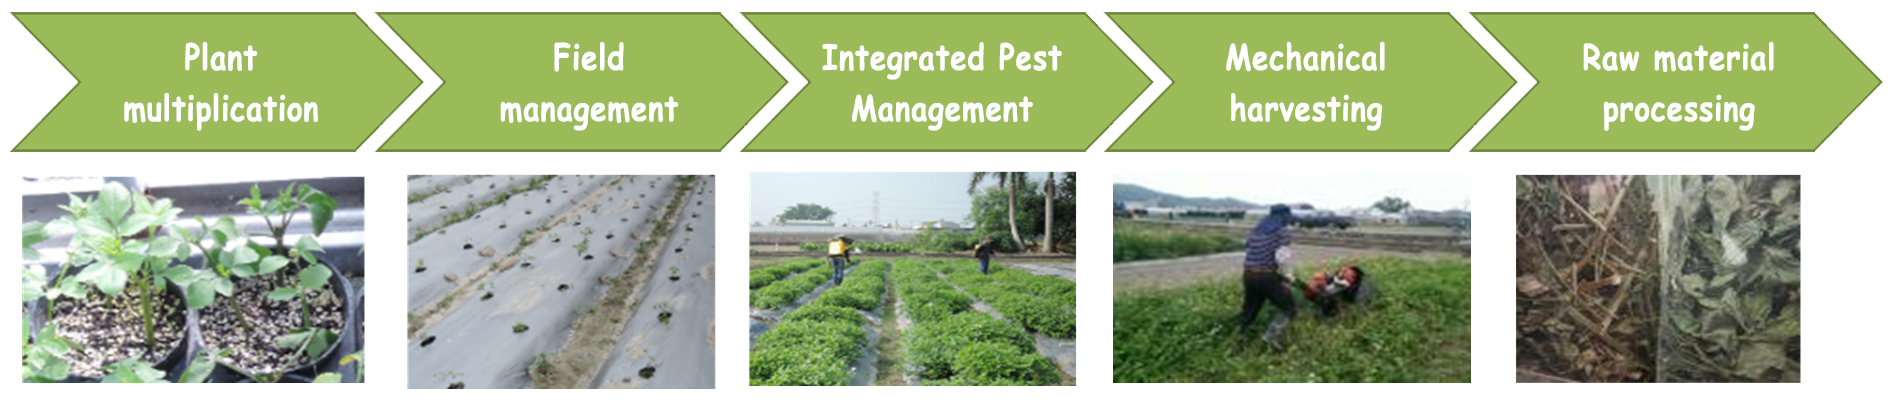 Plant multipli-cation→Field management→Integrated Pest Management→Mechanical harvesting→Raw material processing